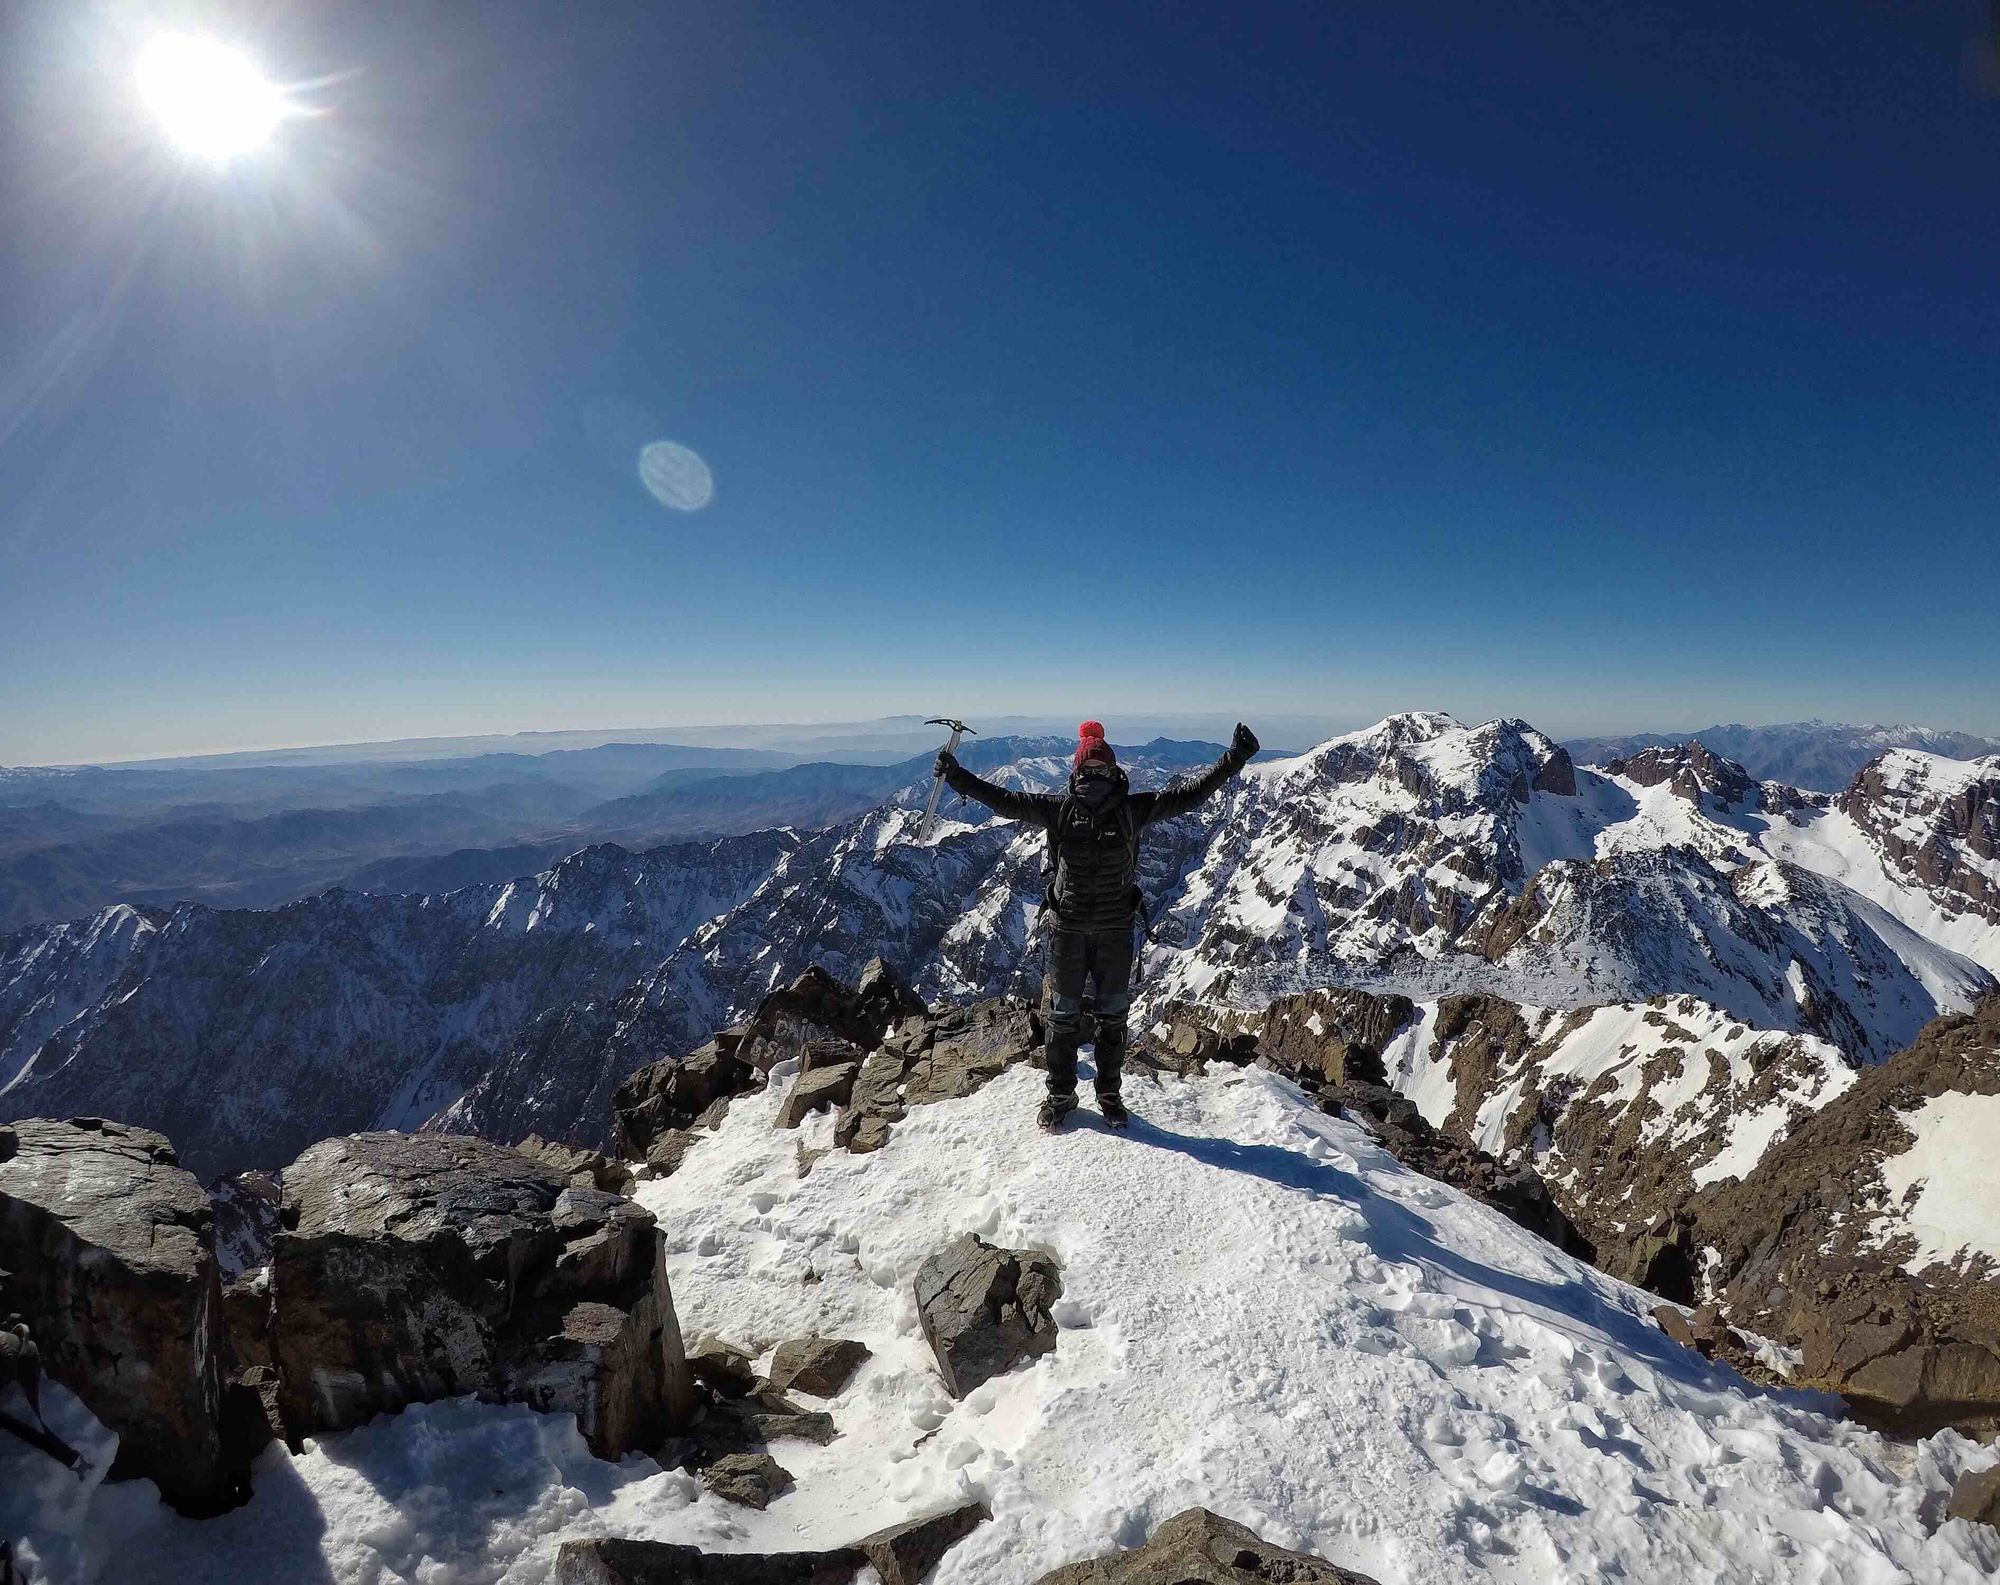 Taking on Mt. Toubkal: A Photo Story